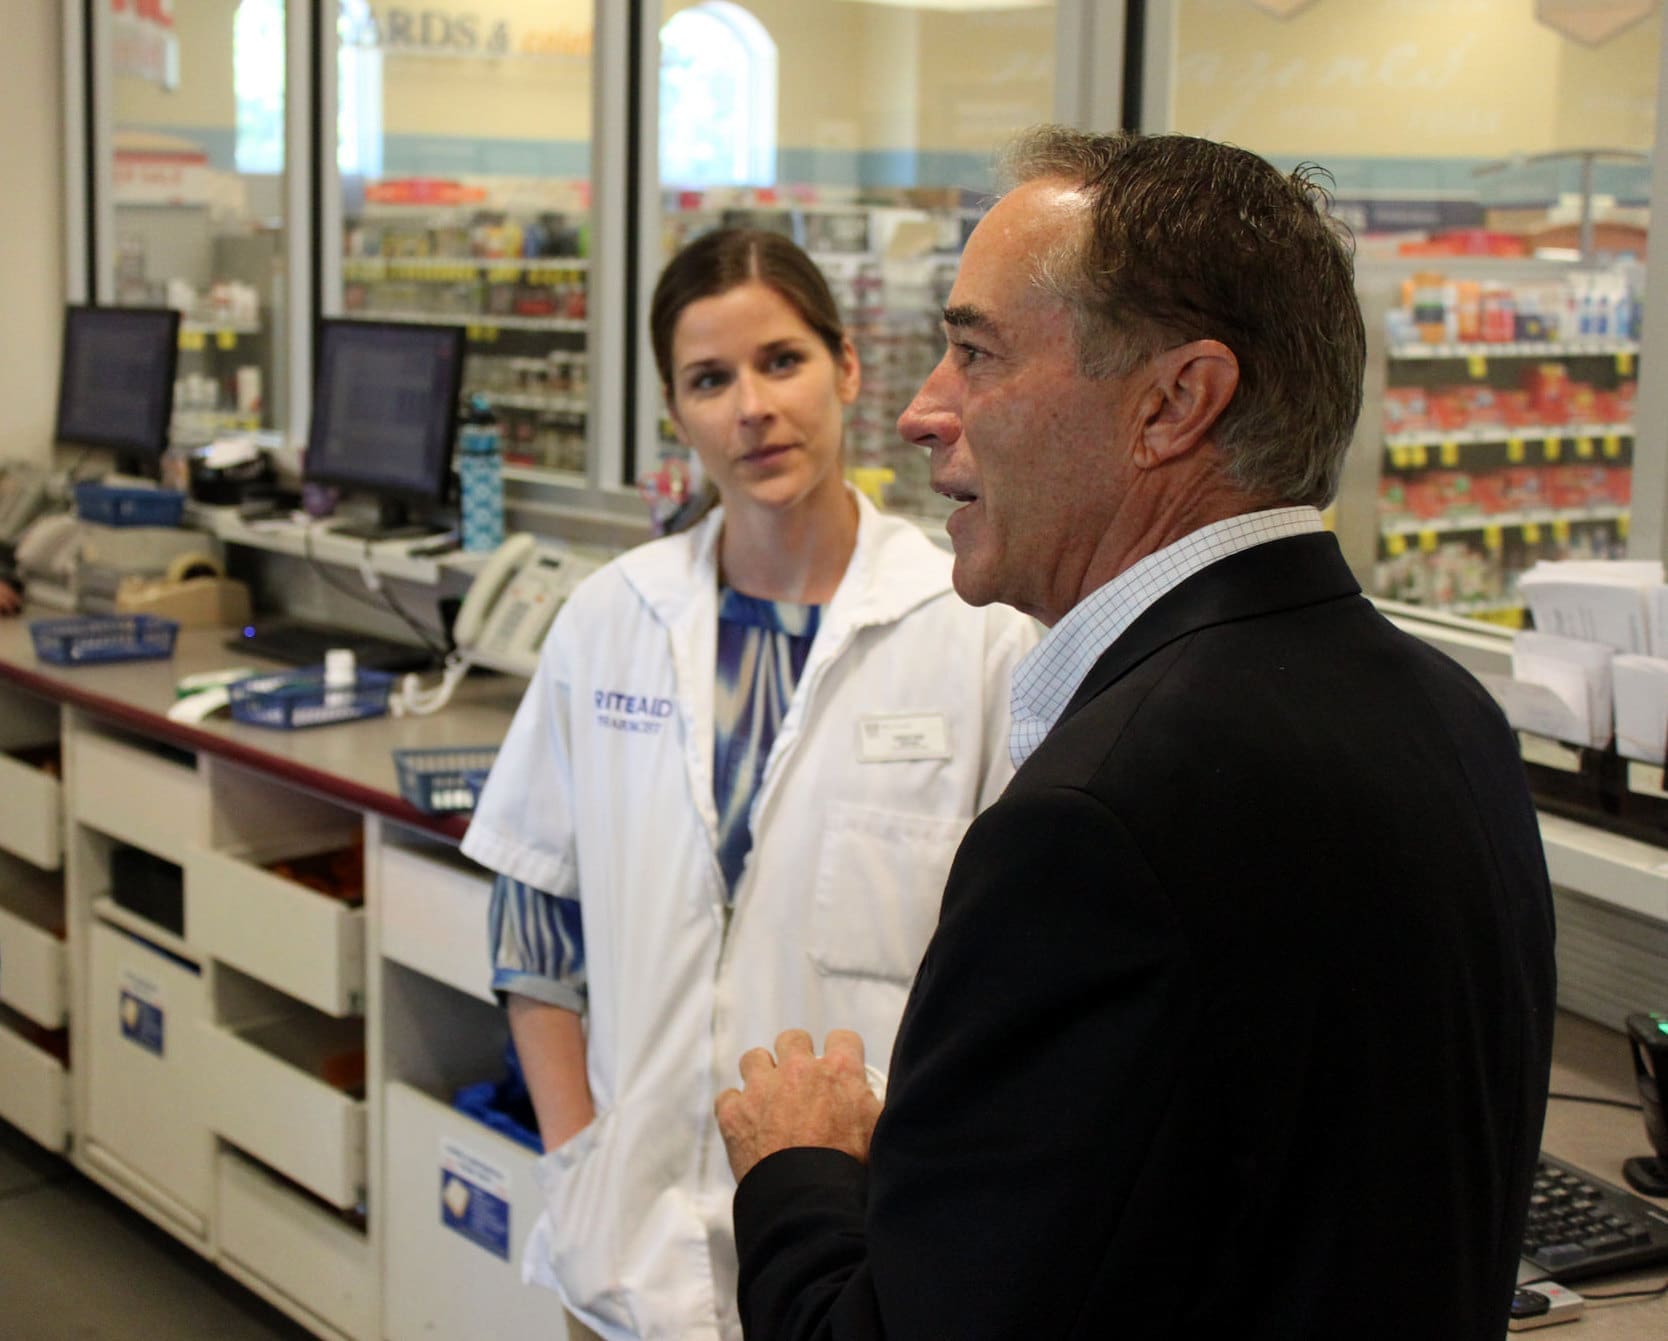 House Energy and Commerce Committee Member Rep. Chris Collins (R-NY) participated in an NACDS RxIMPACT pharmacy tour of a Rite Aid in Lancaster, N.Y.